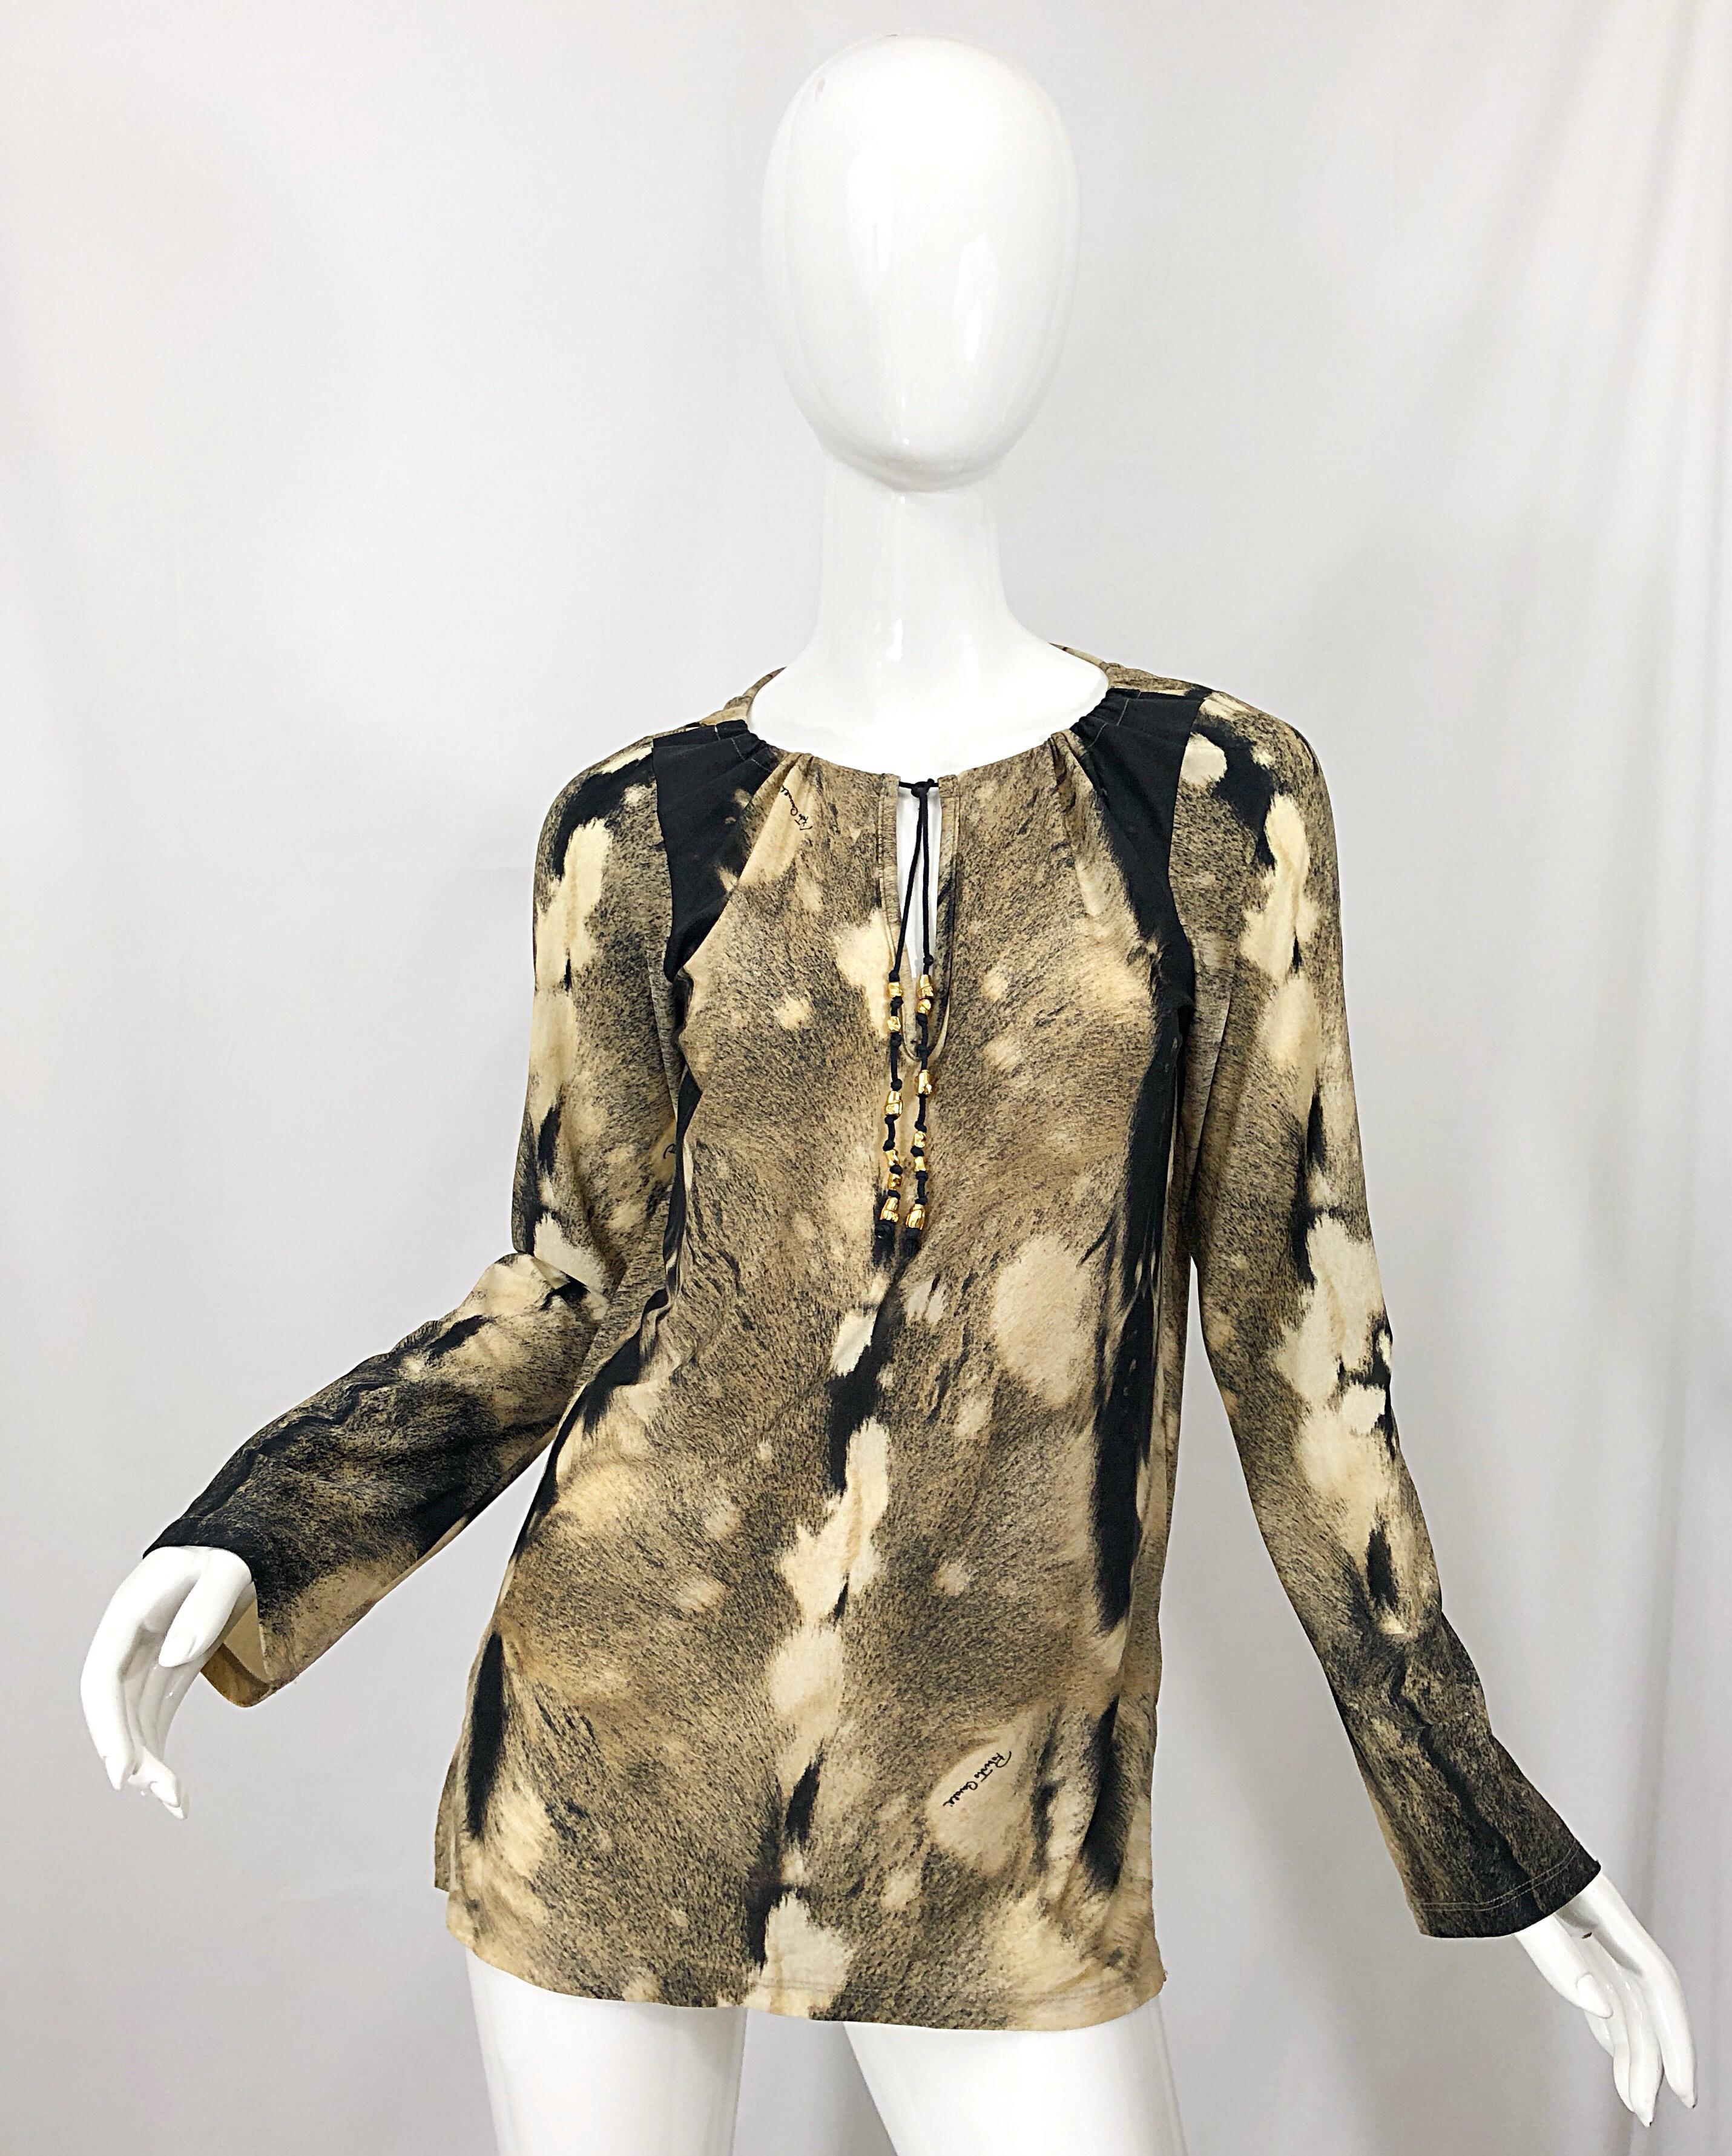 Awesome vintage late 1990s ROBERTO CAVALLI trompe l'oeil faux fur print brown and ivory tunic shirt! Features a warm brown and ivory print throughout. Soft stretch jersey offers a flattering comfortable fit. Gold beaded tassels at center neck. Side